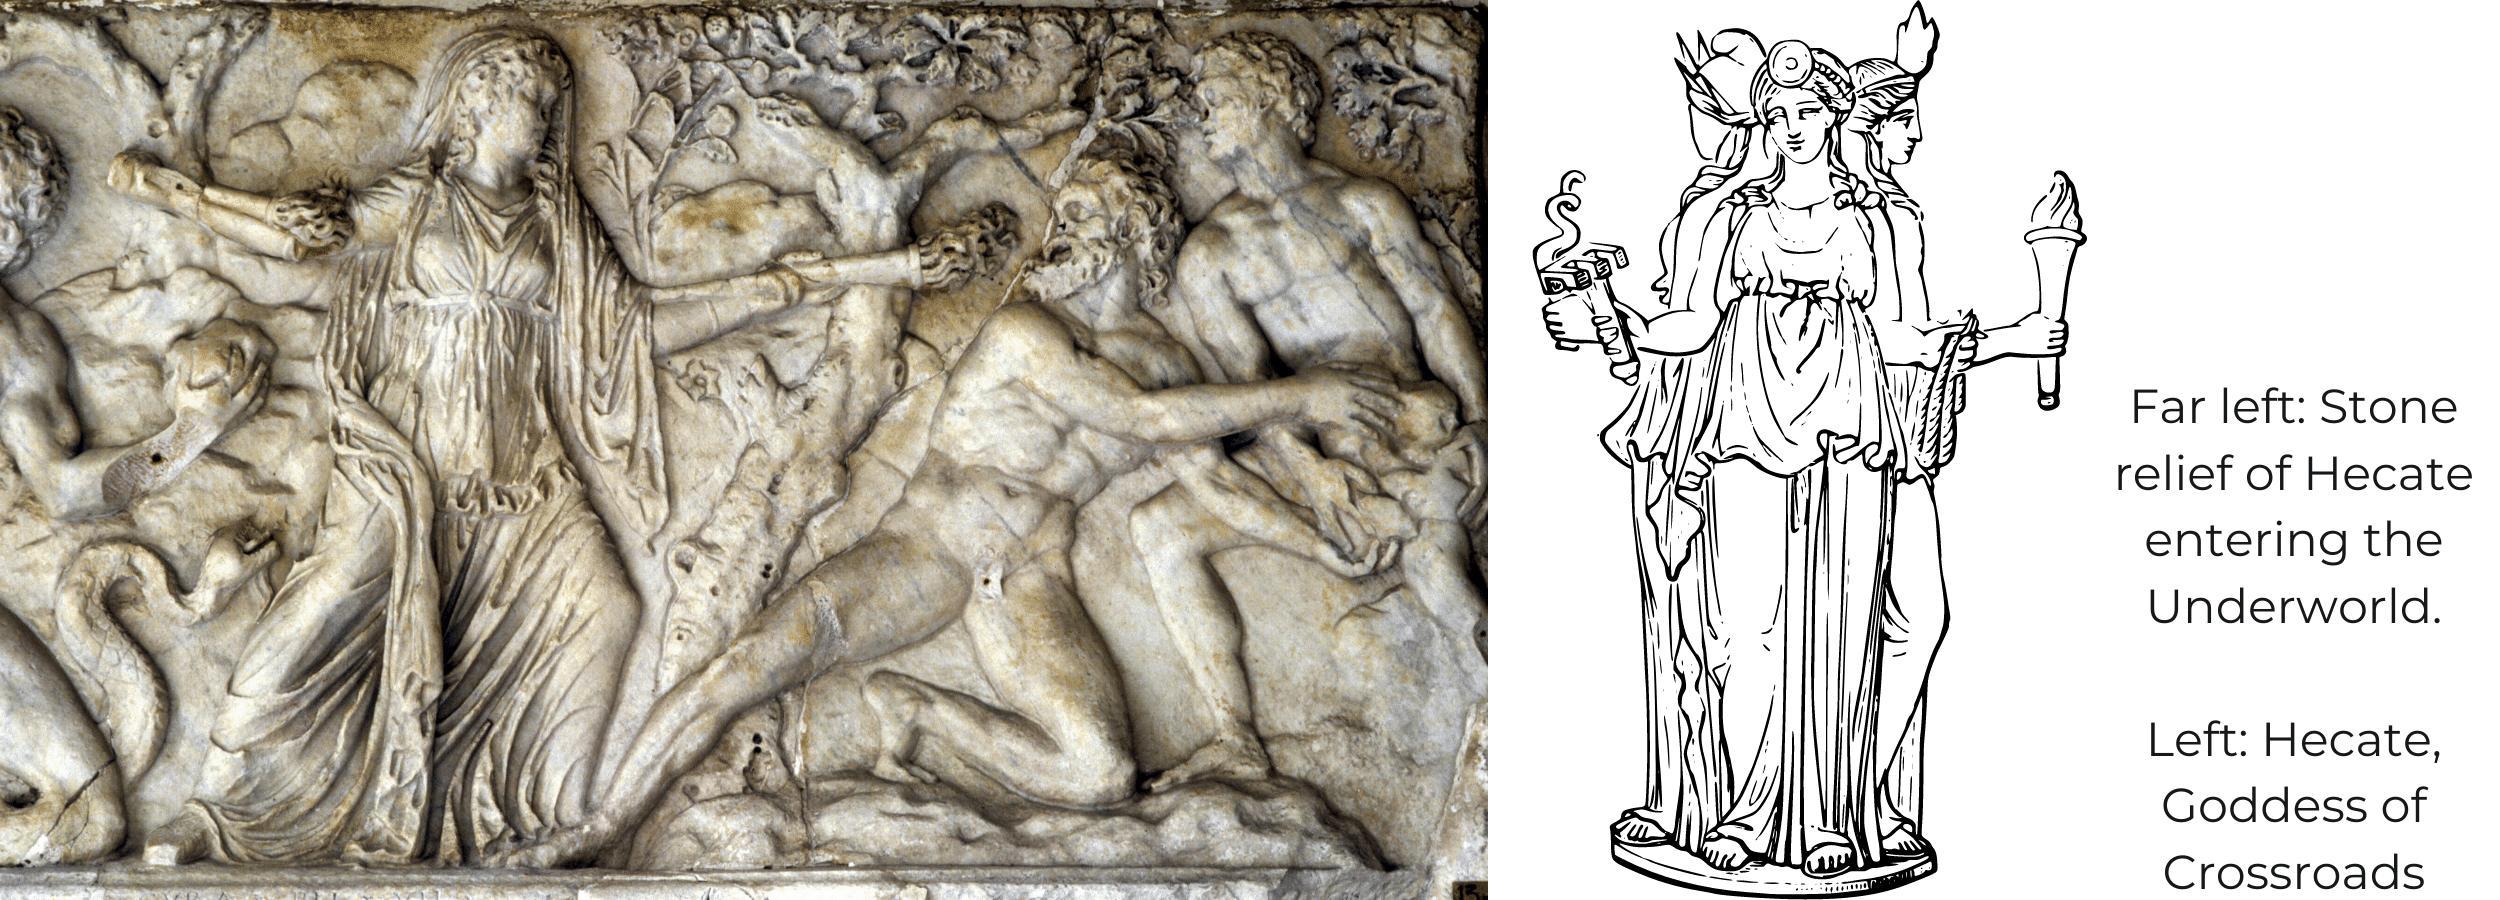 Stone relief of Hecate in the Underworld and drawing of Hecate the Triple Goddess